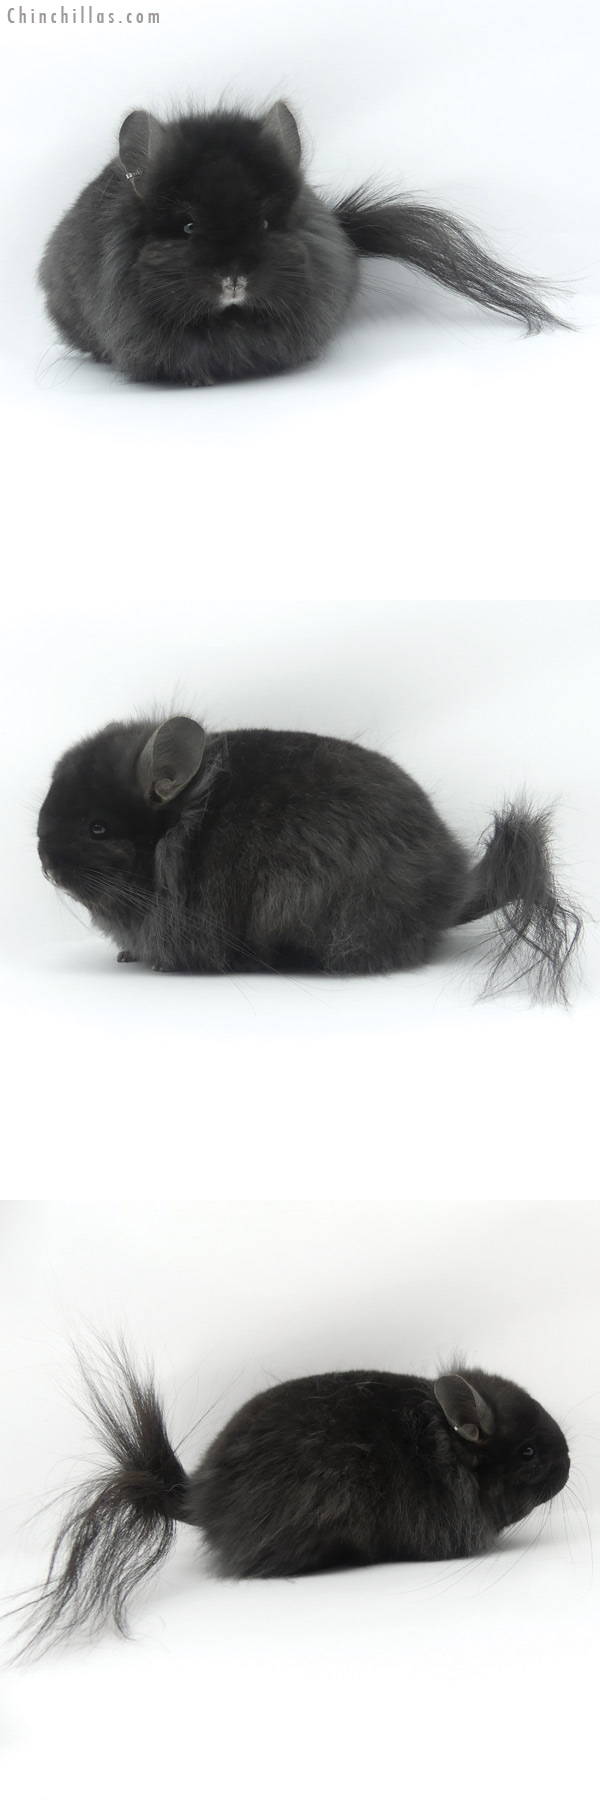 Chinchilla or related item offered for sale or export on Chinchillas.com - 19419 Exceptional Blocky Brevi Type Ebony G2  Royal Persian Angora Female Chinchilla